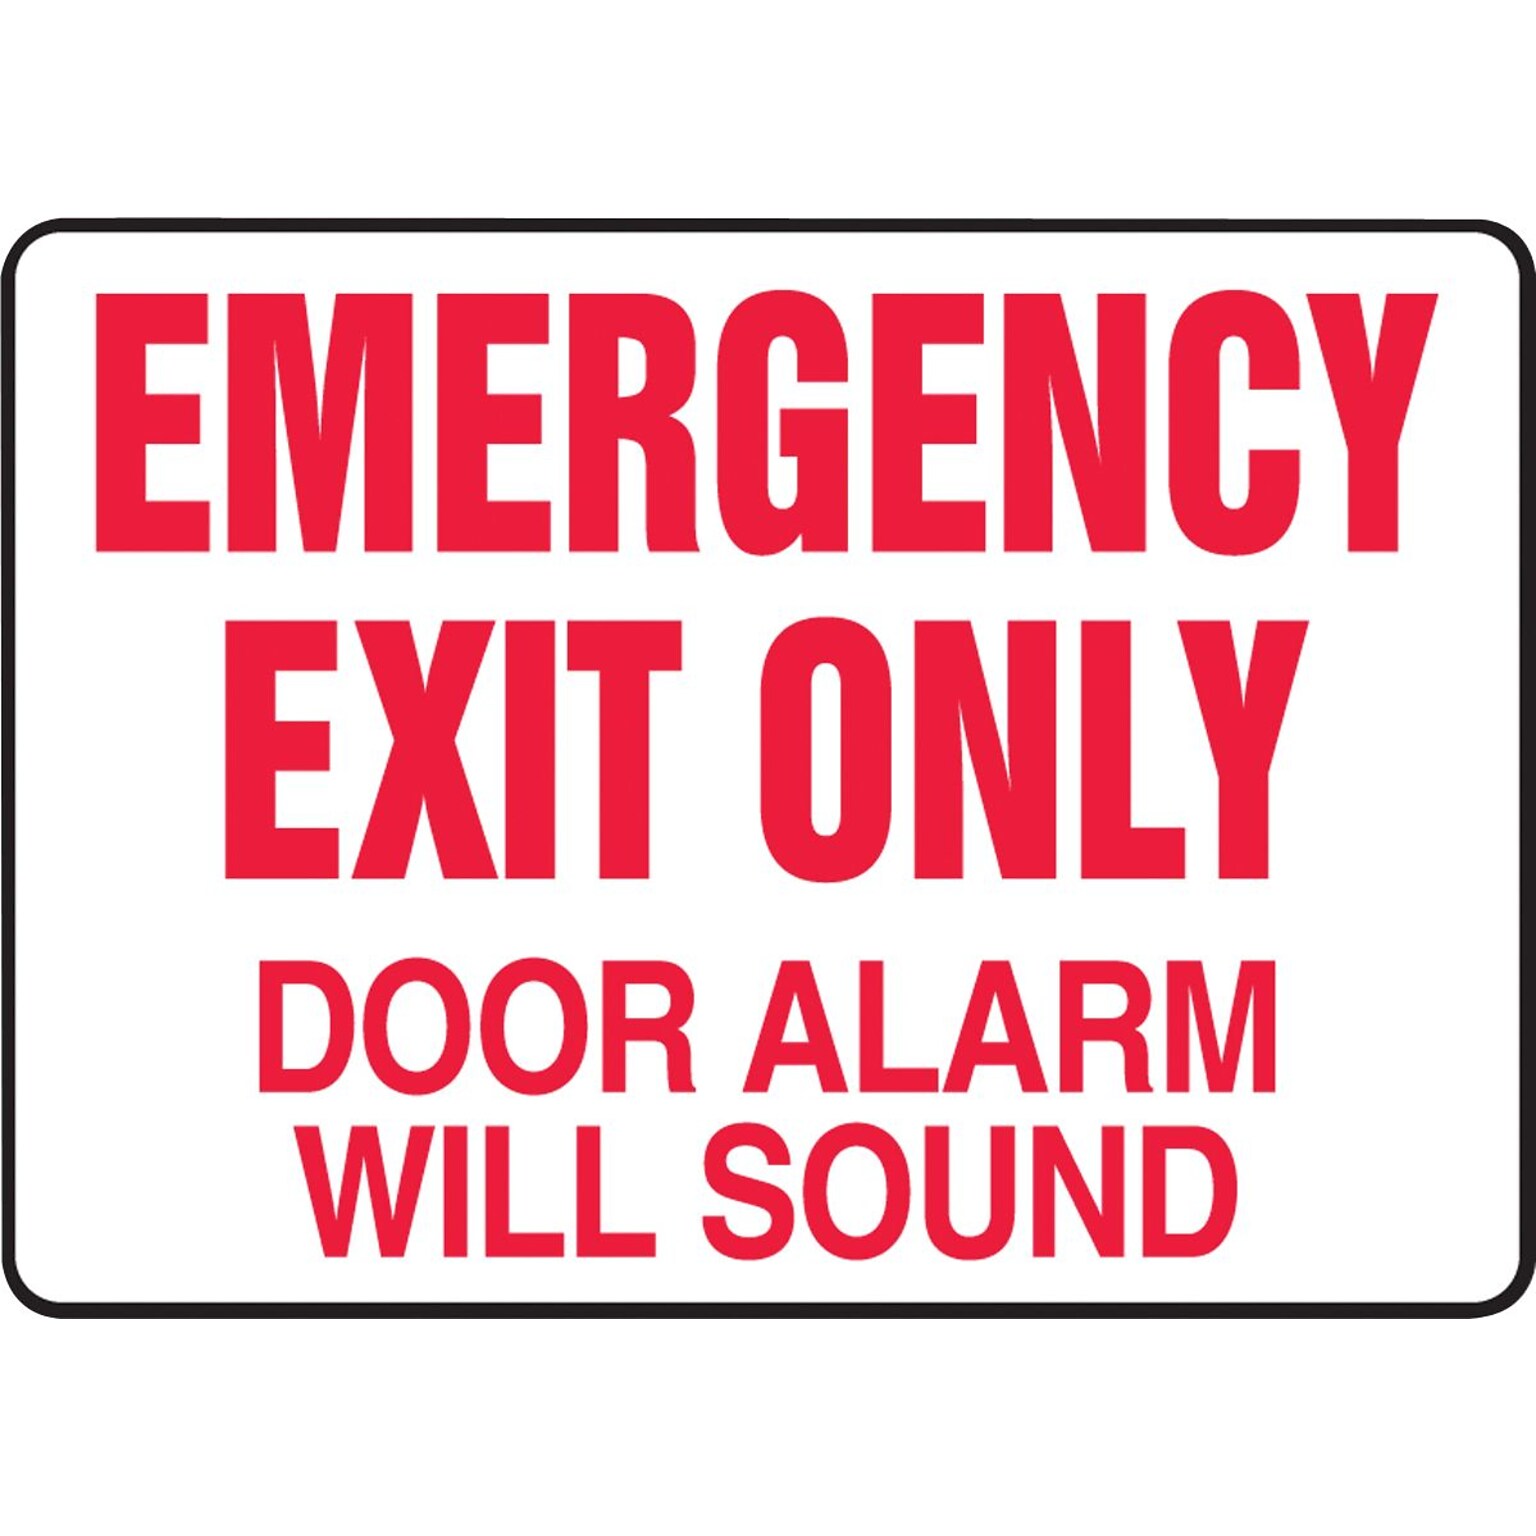 Accuform Safety Sign, Emergency Exit Only, 10 X 14, Adhesive Vinyl (MEXT932VS)